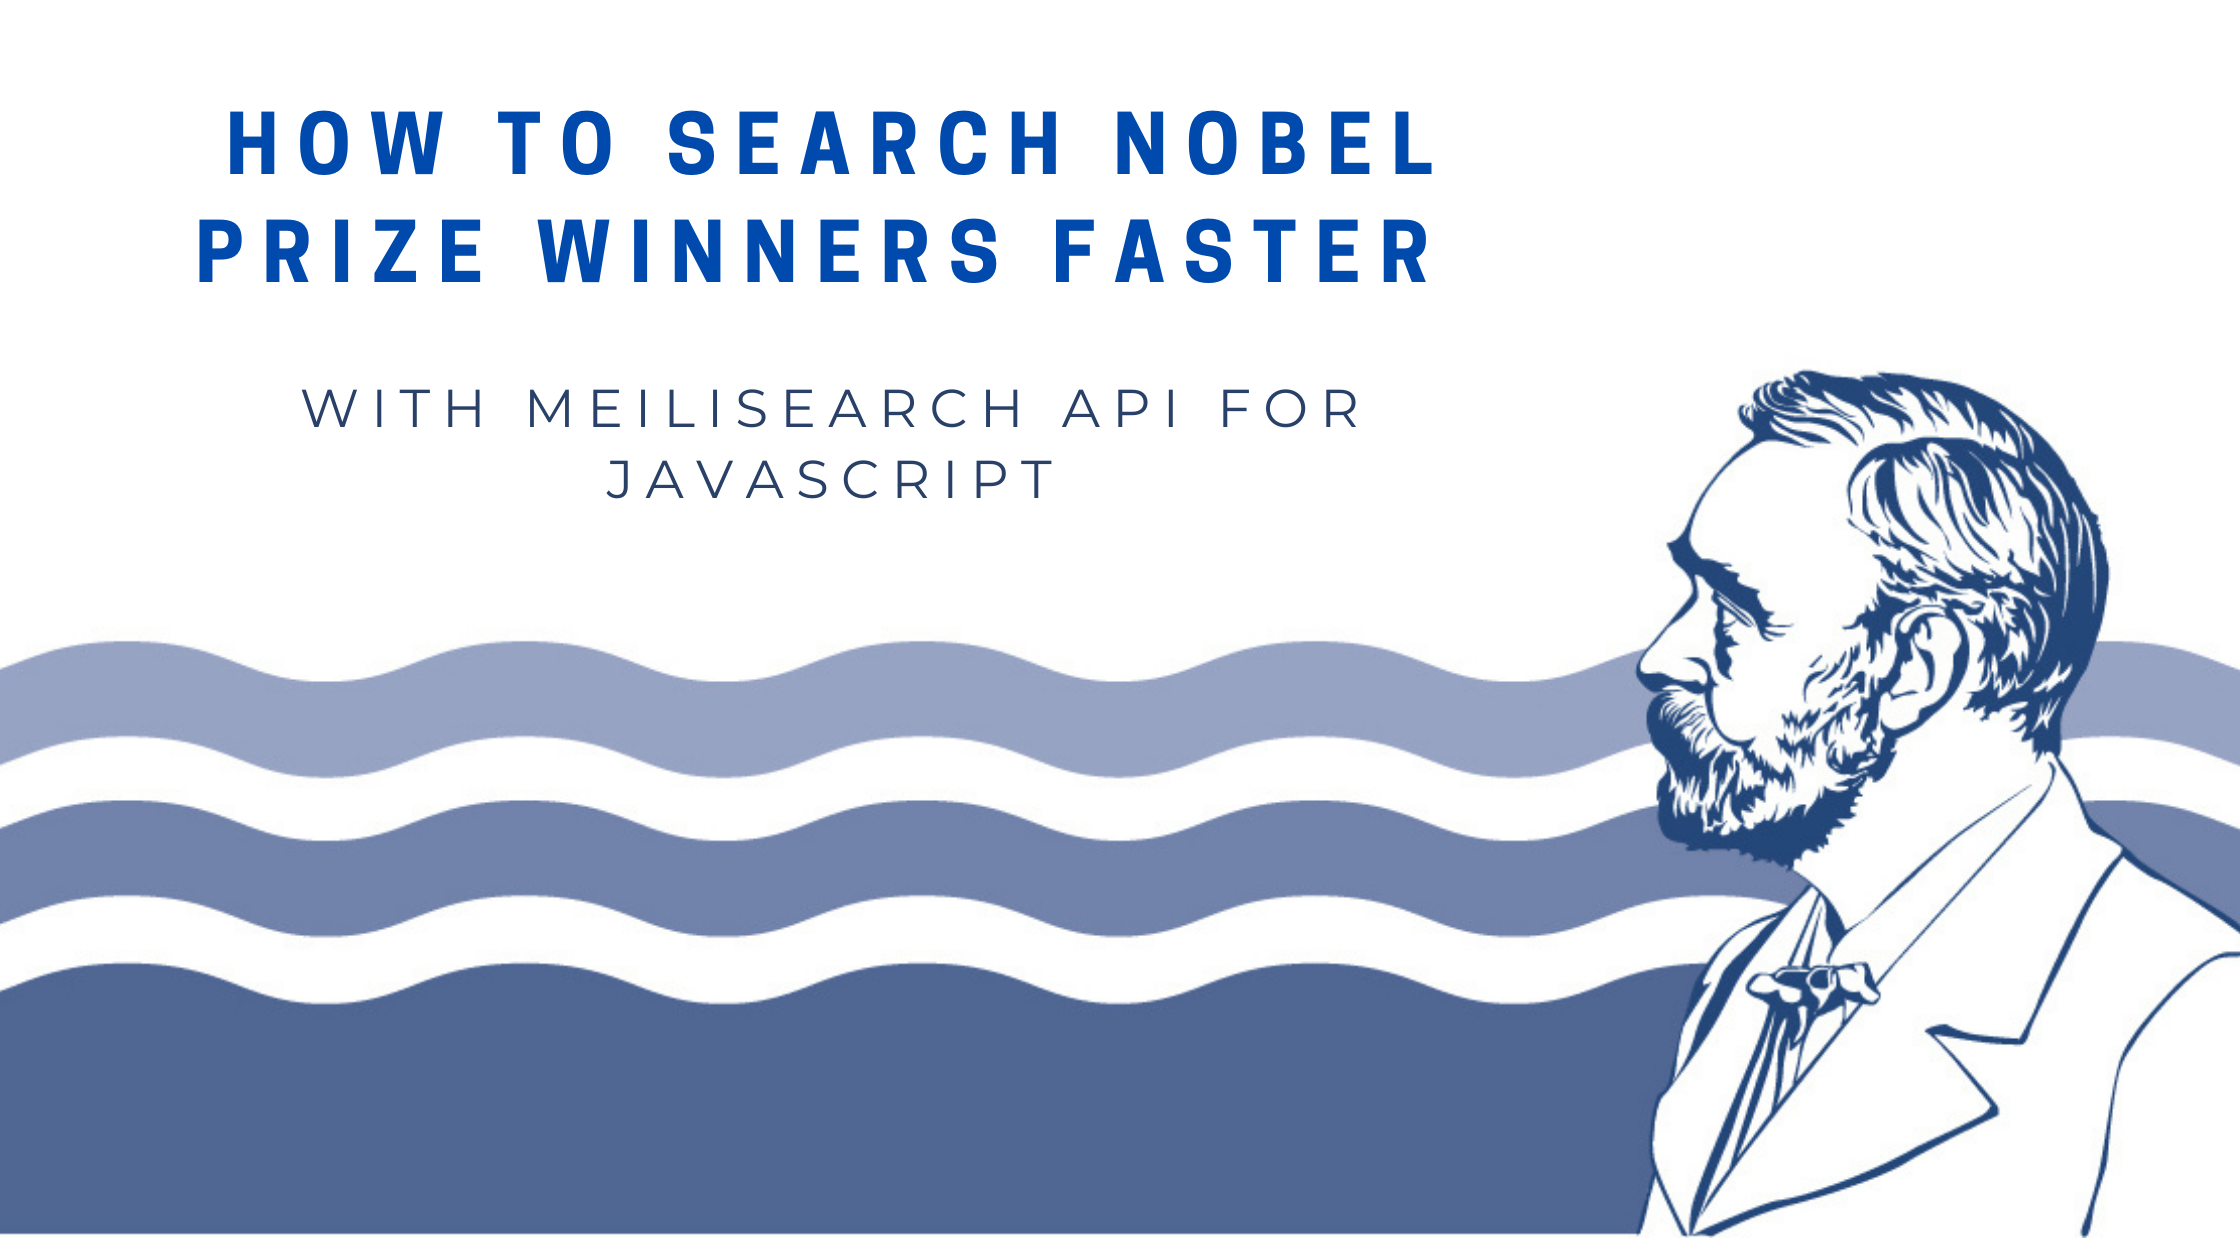 How to search Nobel Prize winners faster with Meilisearch and JavaScript